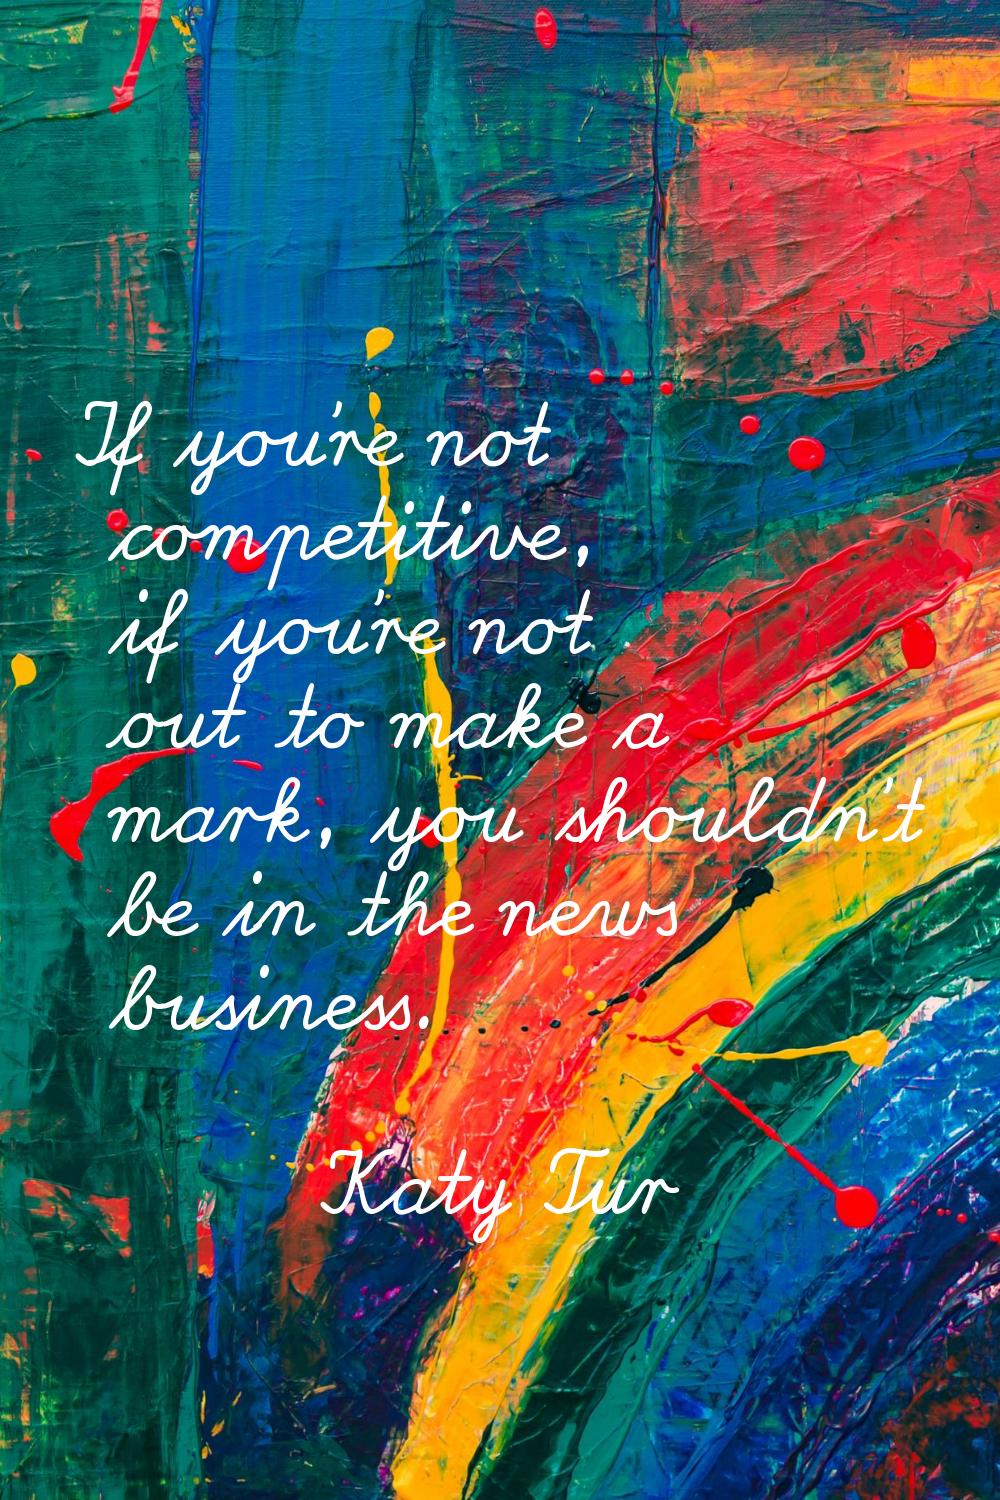 If you're not competitive, if you're not out to make a mark, you shouldn't be in the news business.